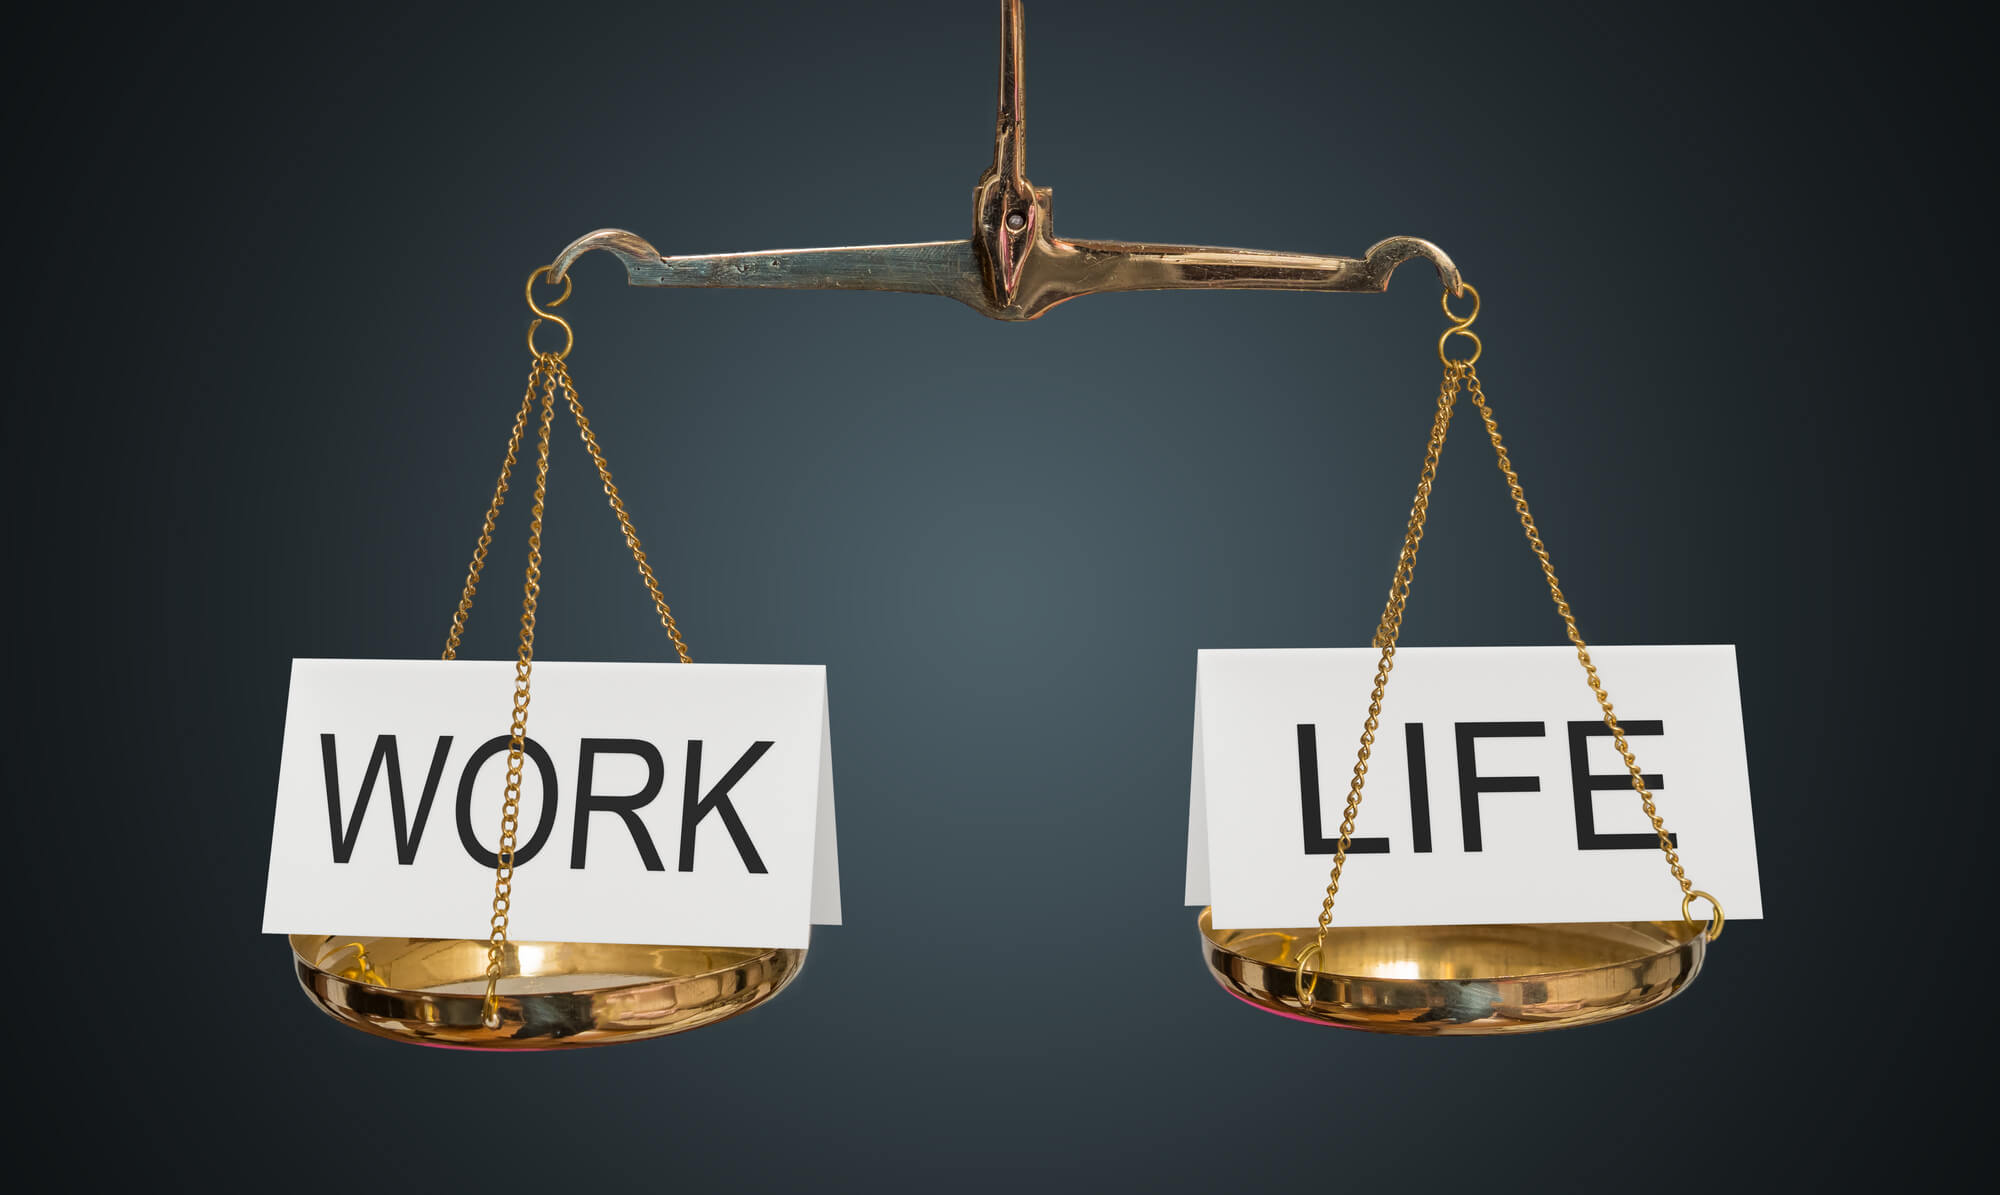 Work-Life Balance Is No Longer Just A Company Issue